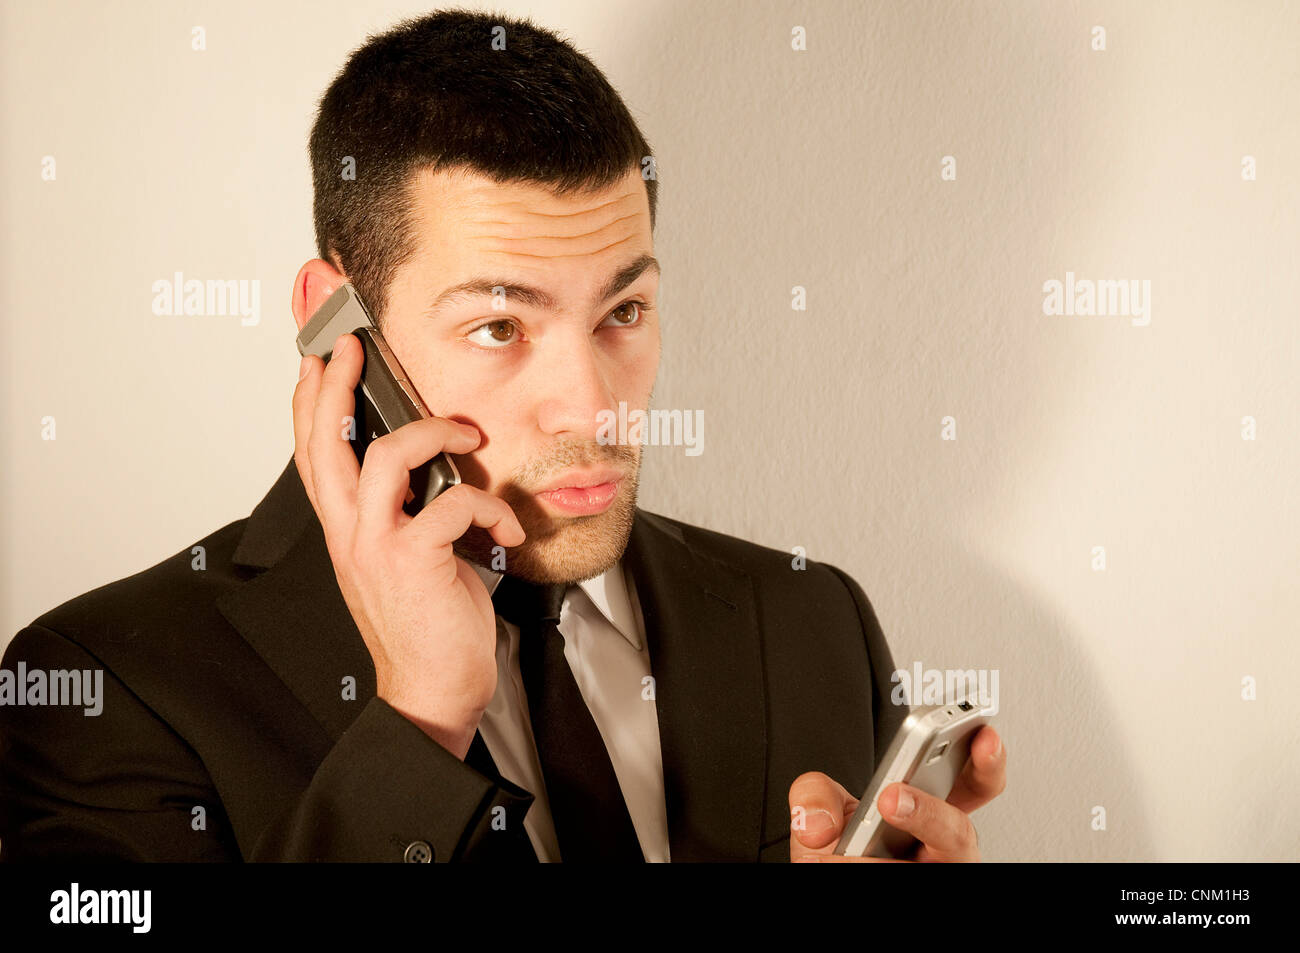 Young man using two mobile phones. Stock Photo